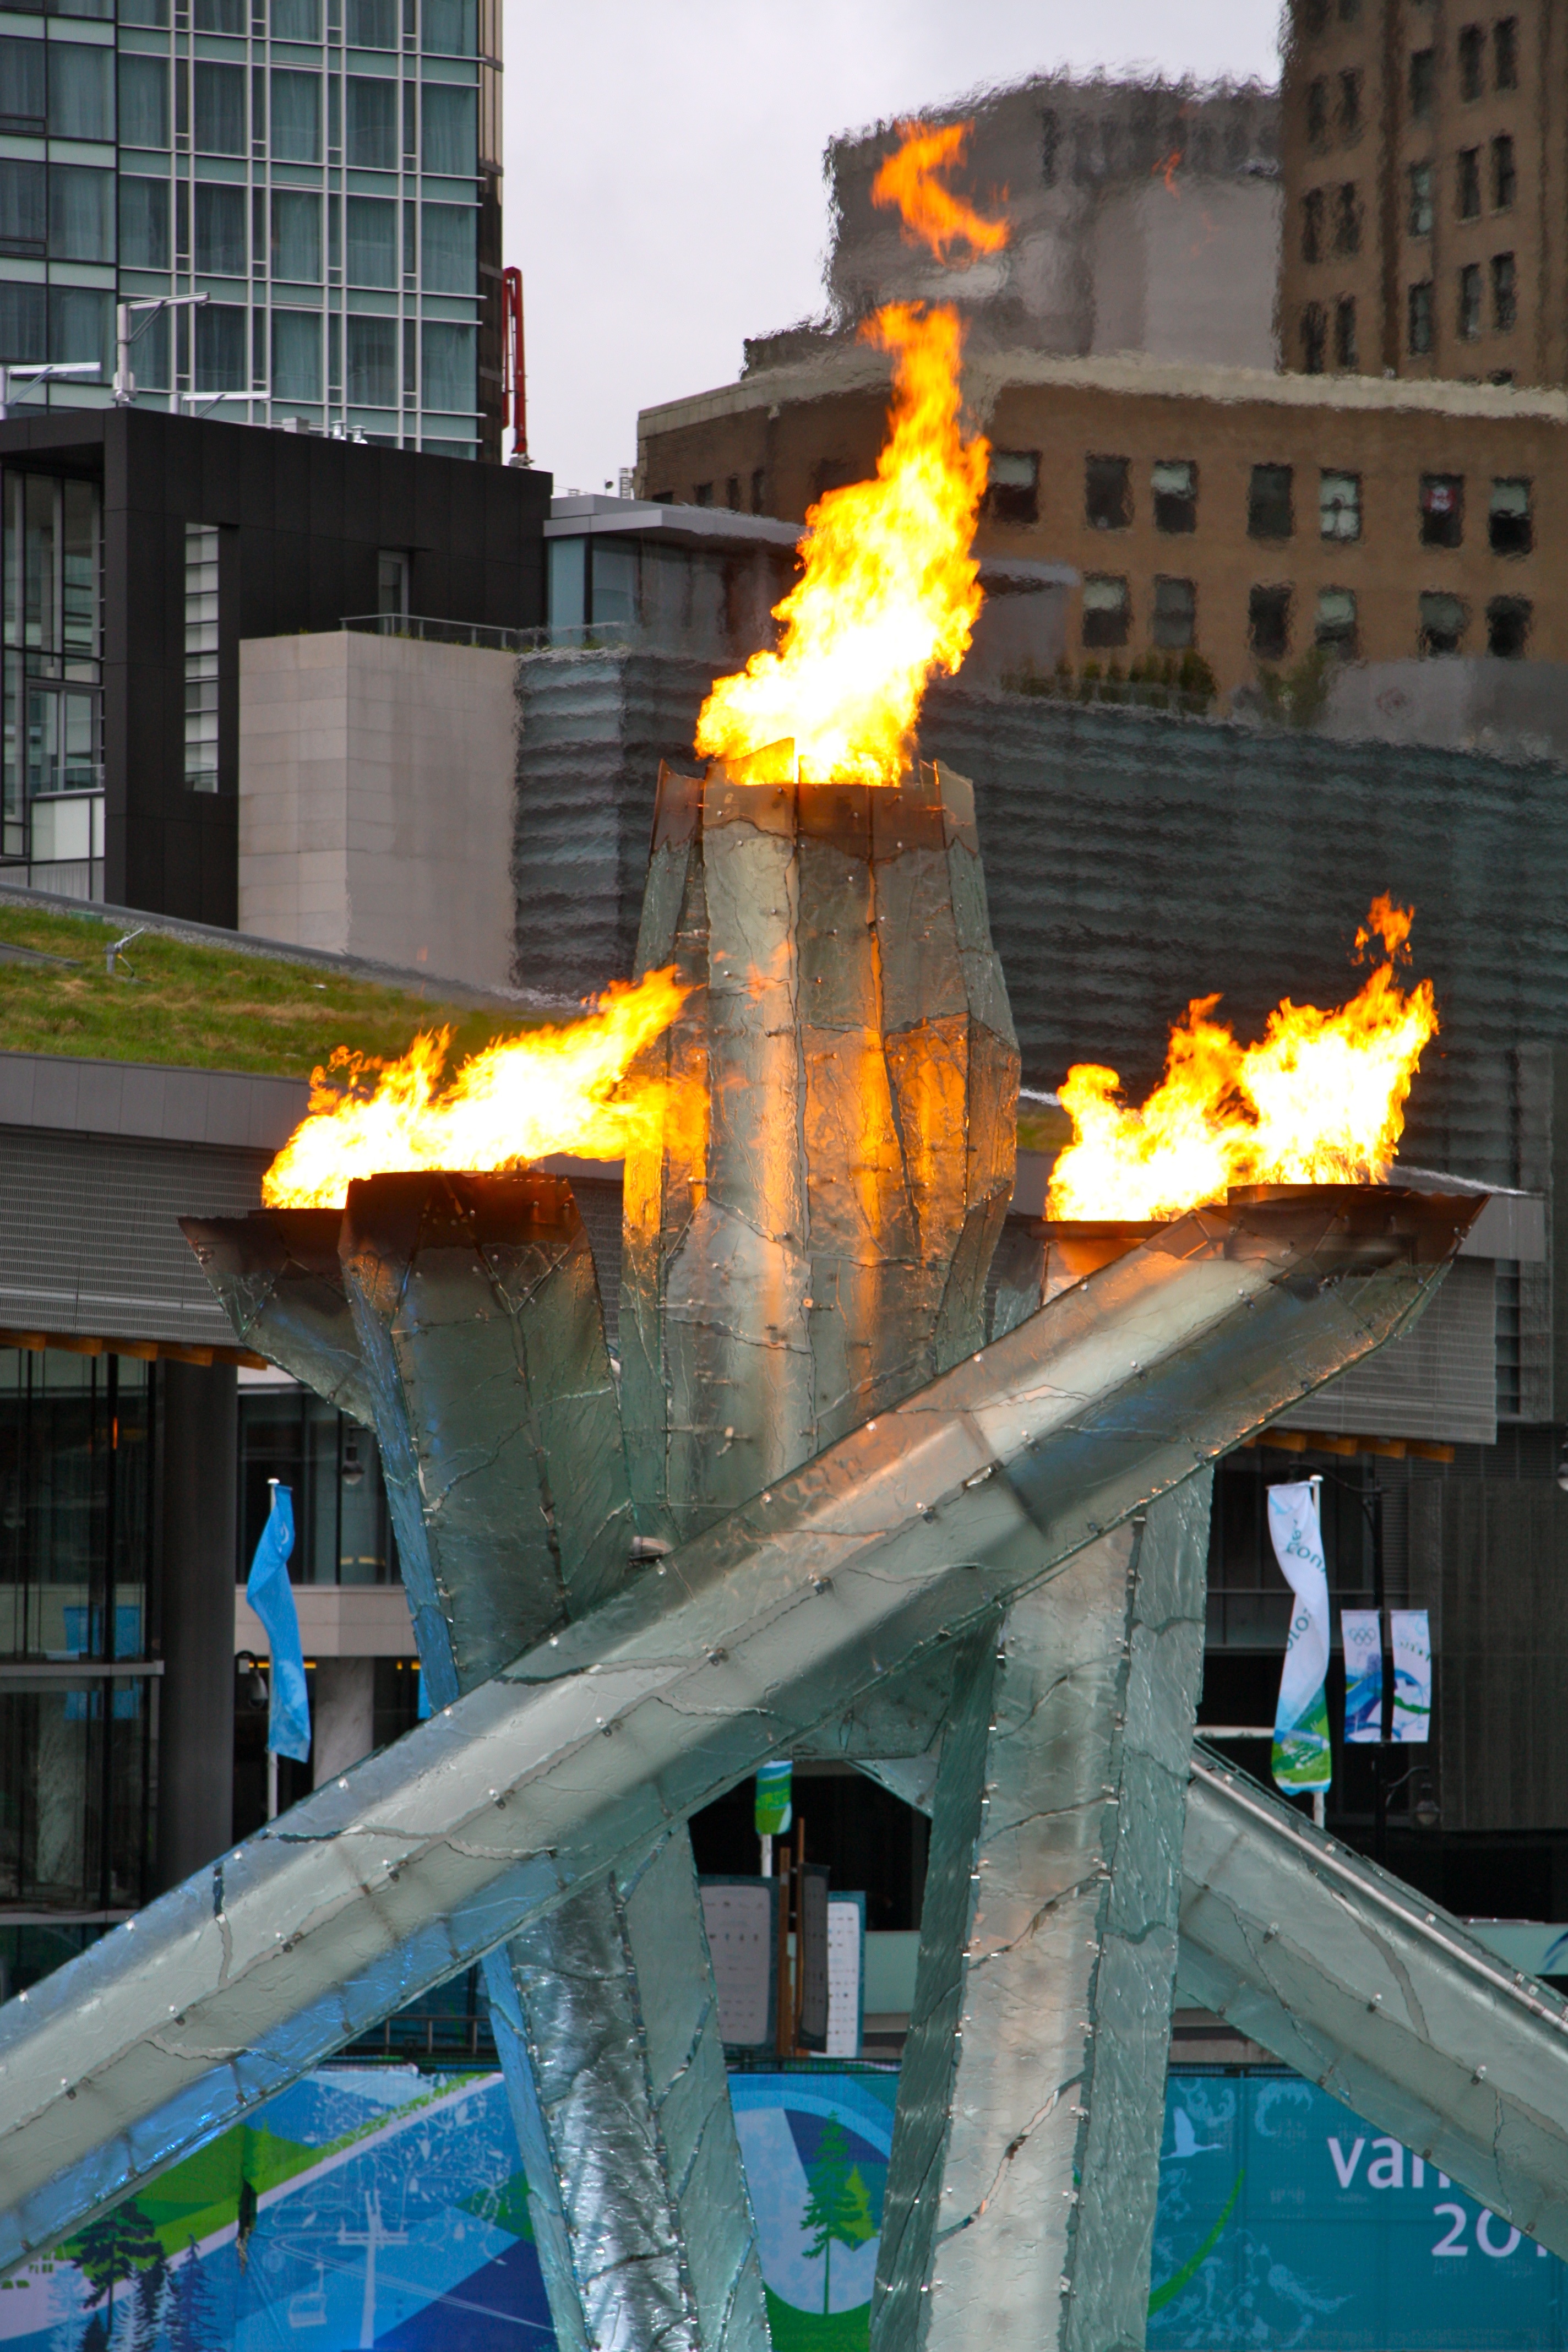 Olympic Fire